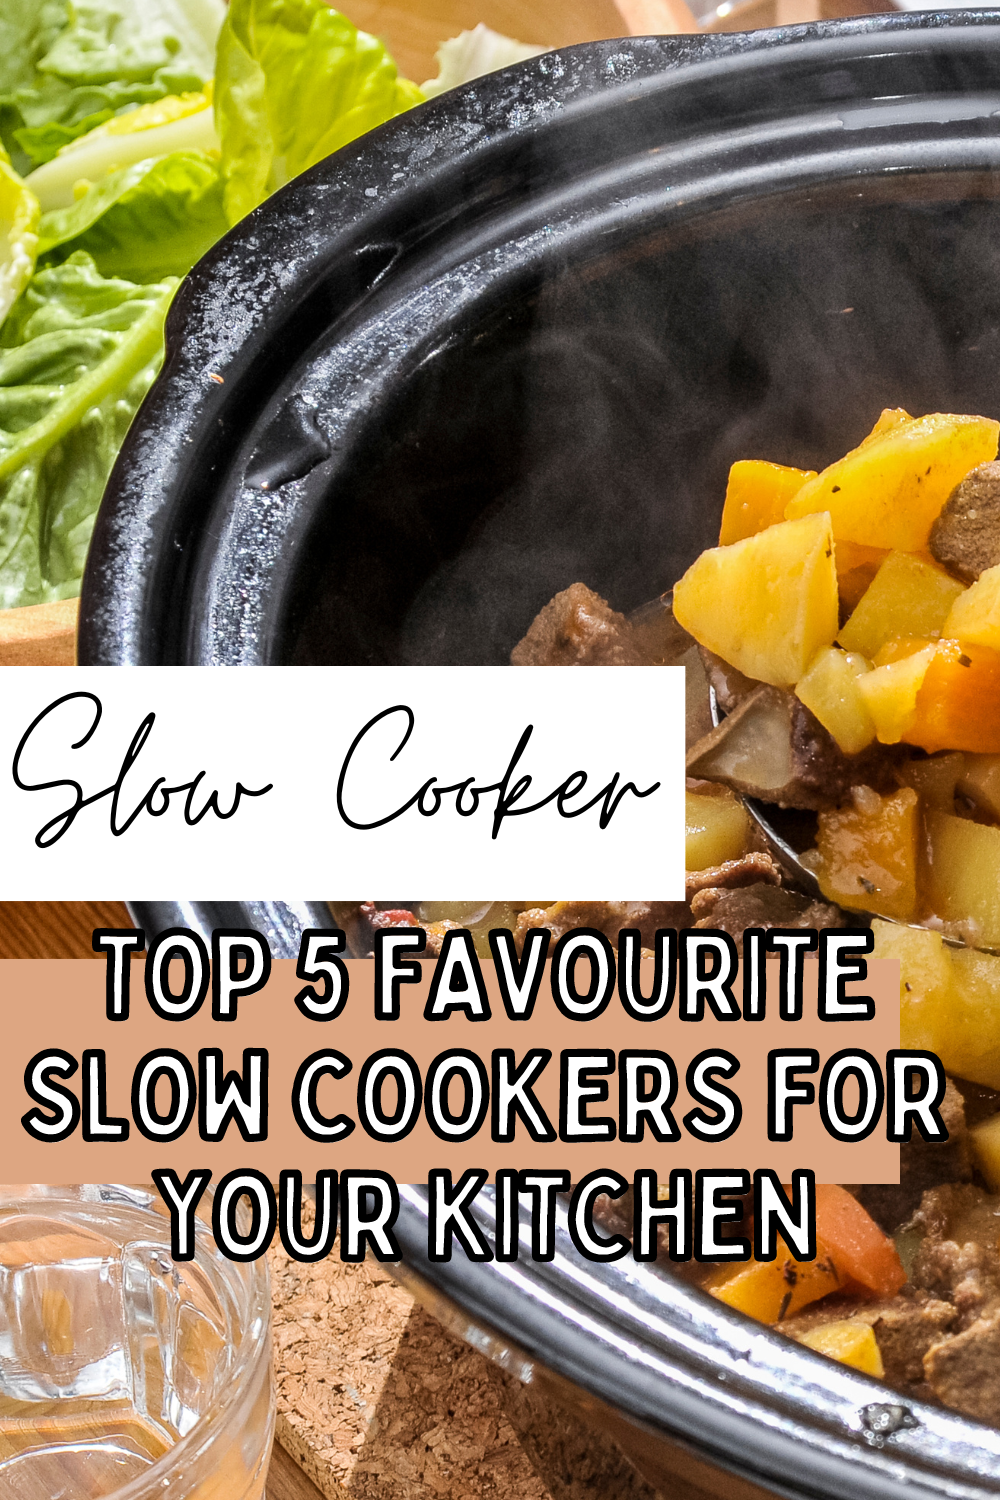 Top 5 slow cookers